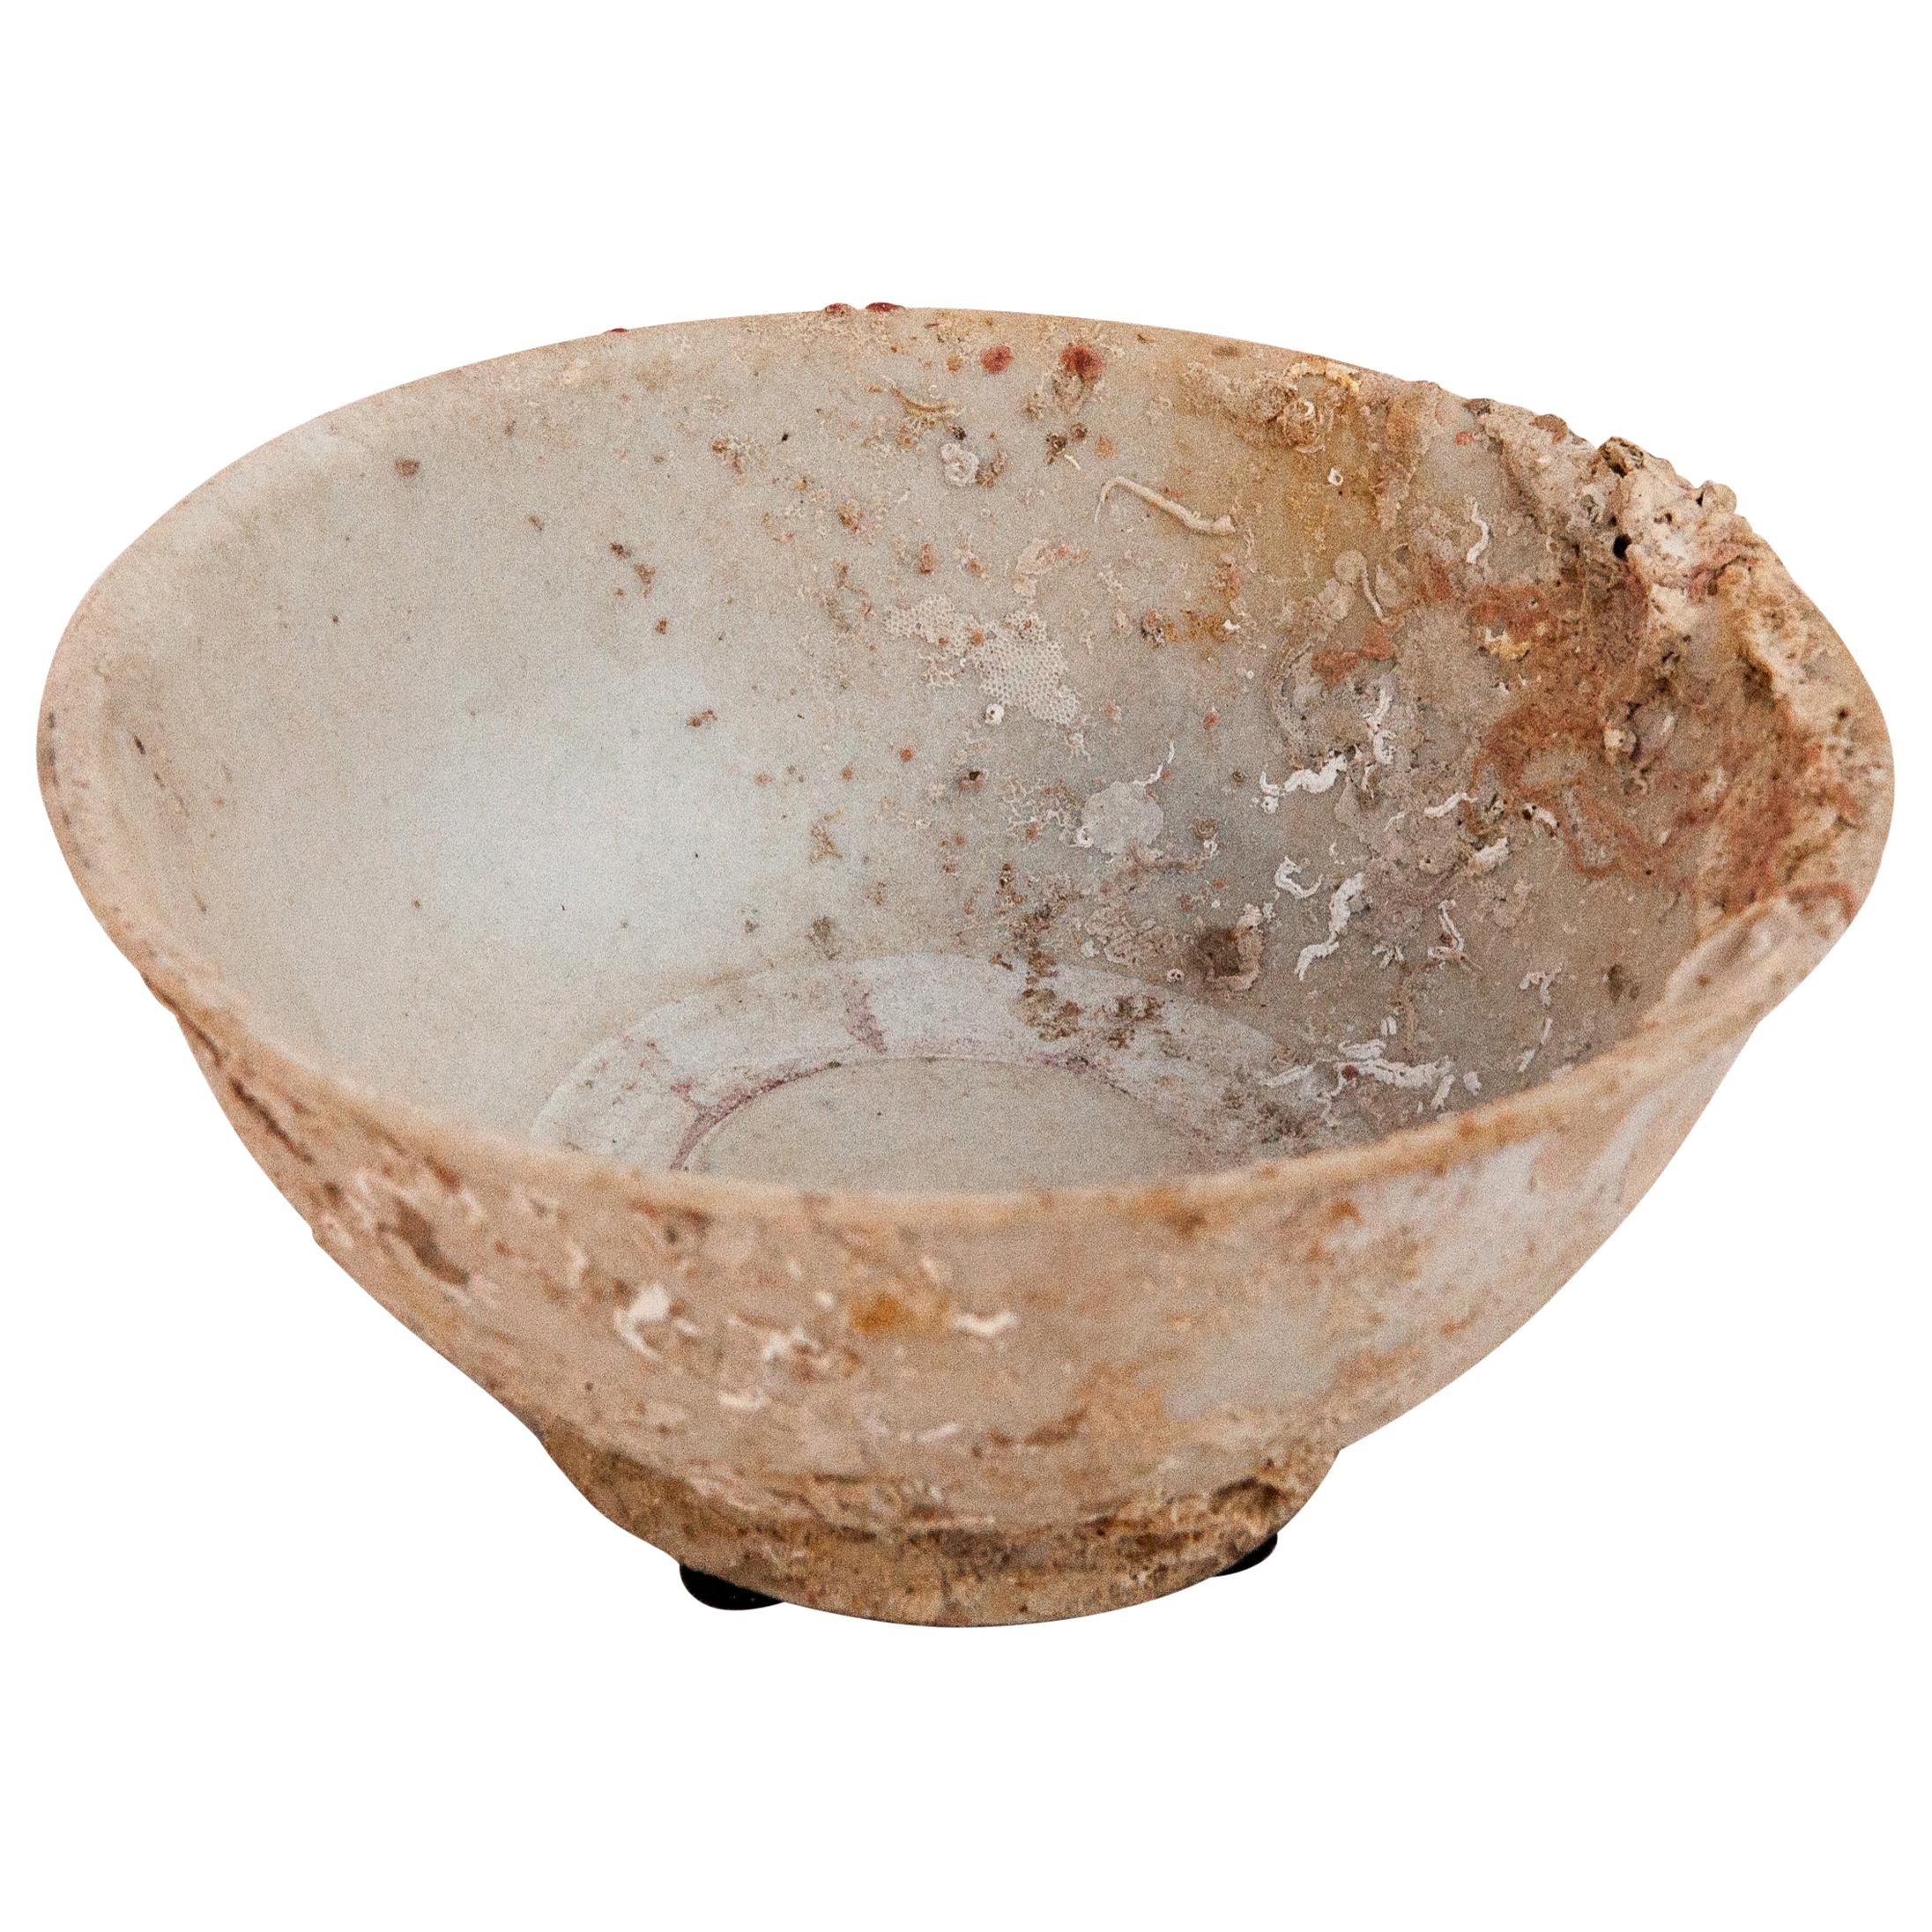 Small Song Dynasty Celadon Bowl with Encrustations, 12th Century